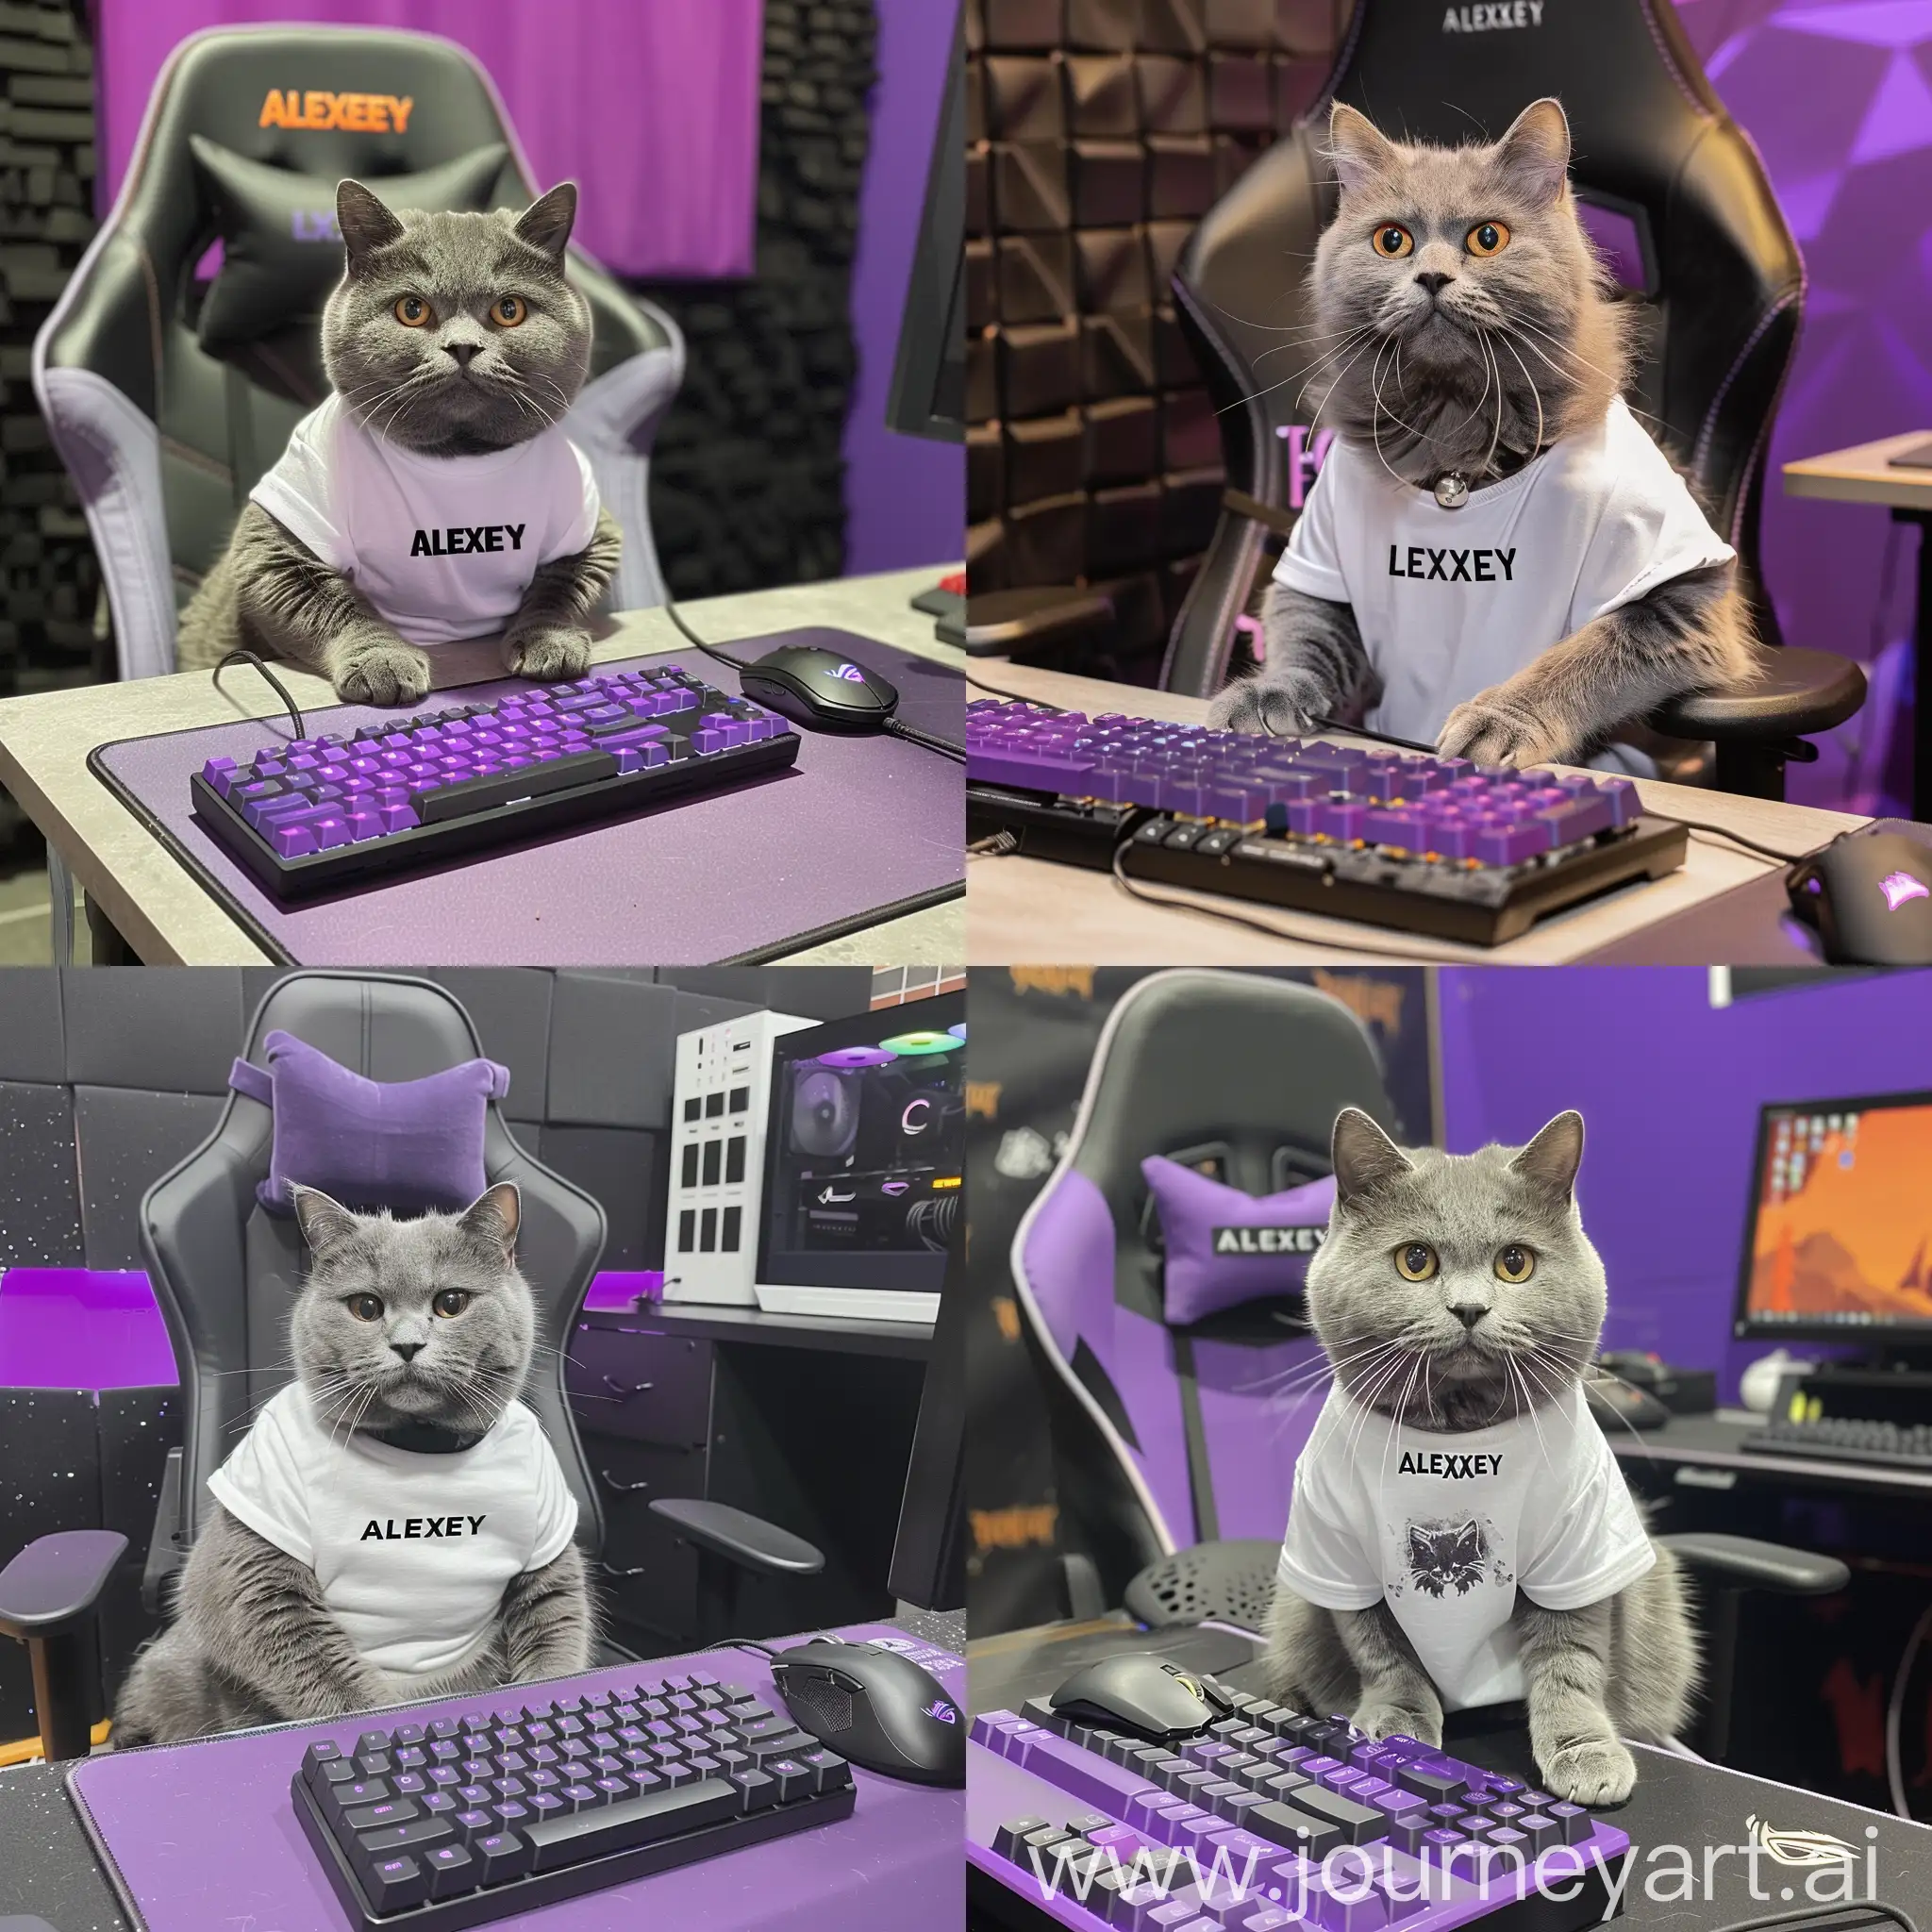 A gray cat of the British breed sits on a computer chair at a table on which there is a purple keyboard and a black gaming mouse, behind the cat there is a black and purple wall, the cat is dressed in a white T-shirt with text"ALEXEY" written in the center of t-shirt